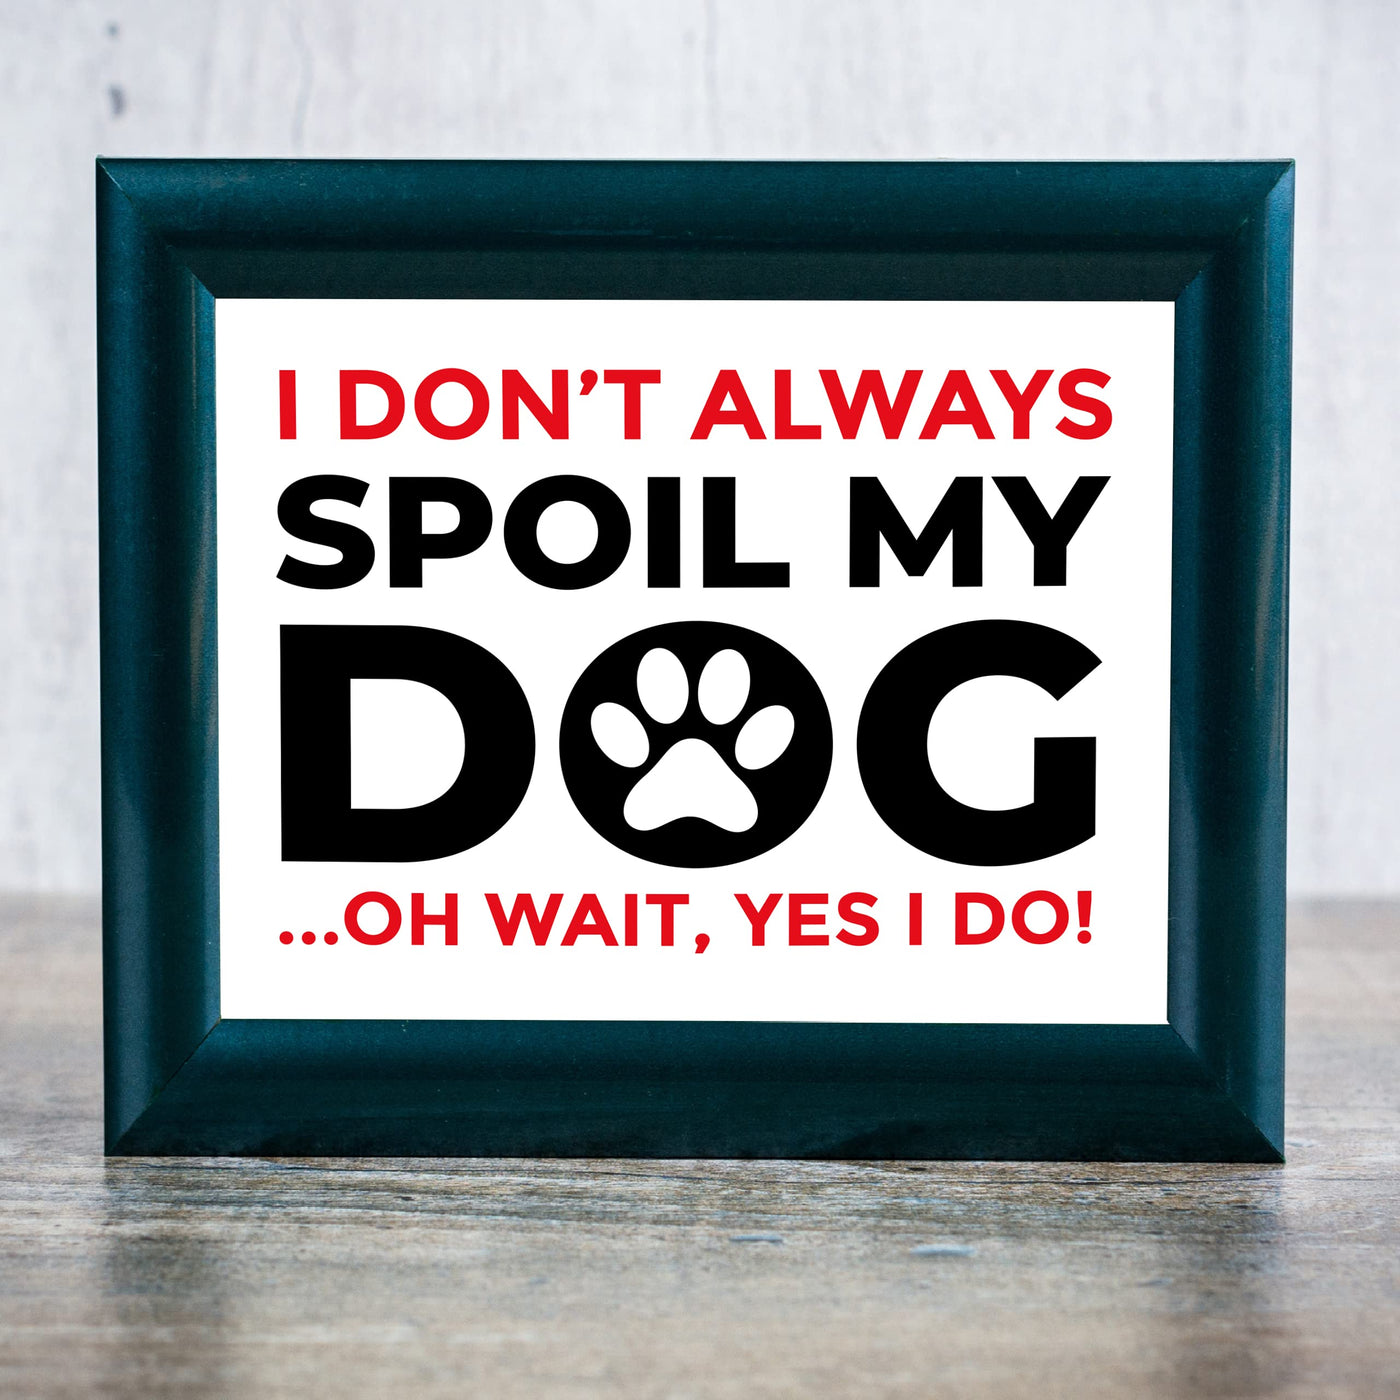 Don't Always Spoil My Pet-Funny Dog Wall Art Sign -10 x 8" Rustic Dogs Theme Wall Decor Print -Ready to Frame. Replica Sign Prints for Home-Kitchen-Welcome-Vet's Office. Fun Gift for Dog Lovers!